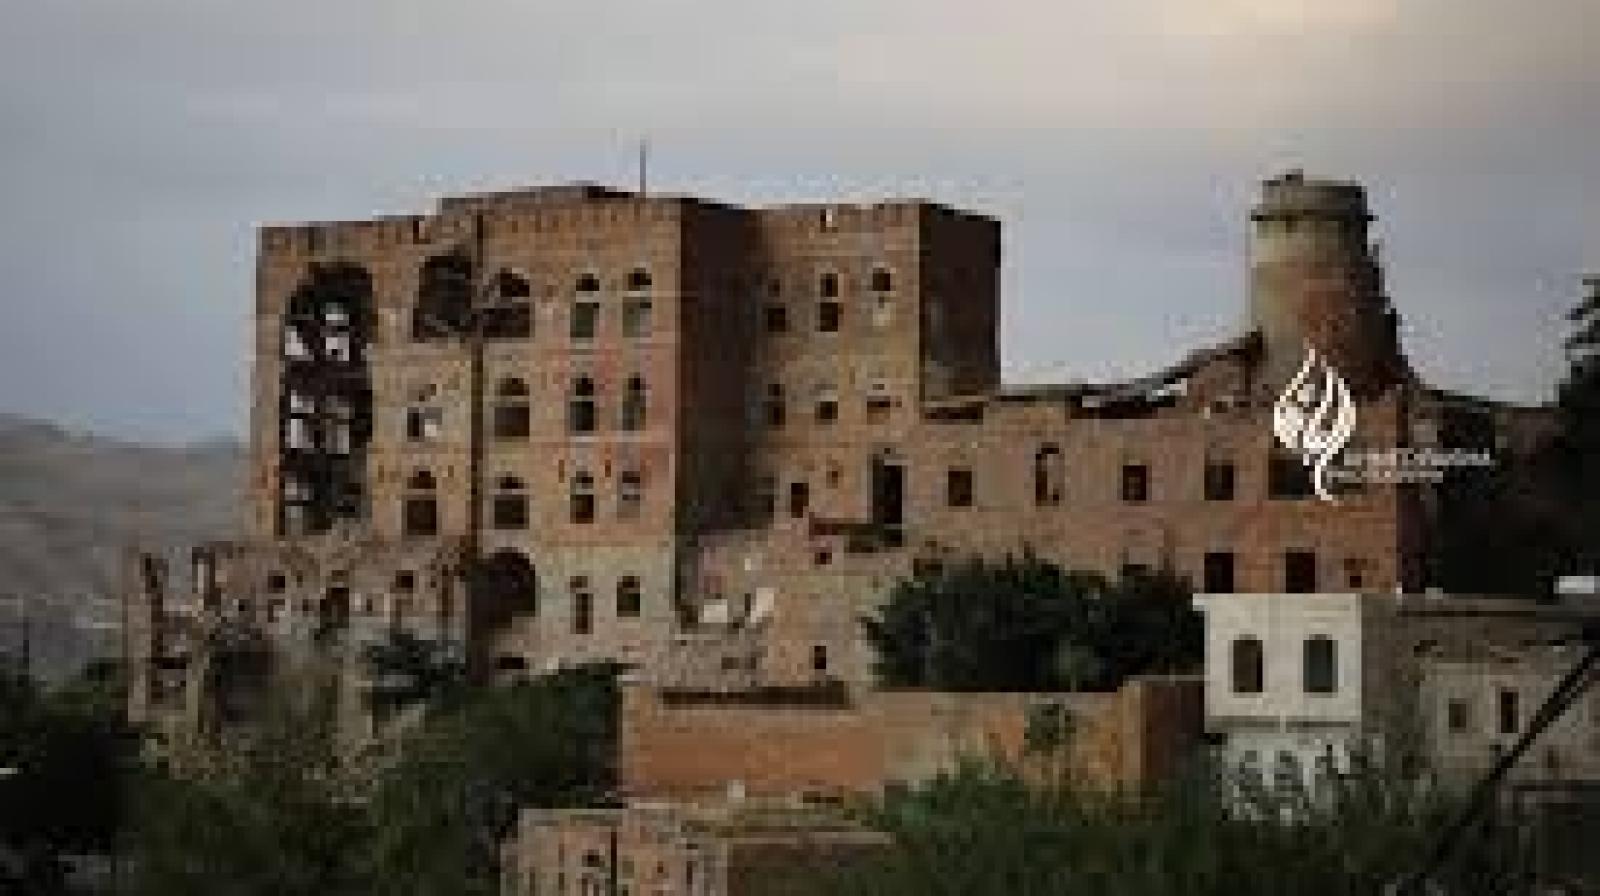 Taiz museum building after it was bombed with mortar rounds by Houthis, Al-Ain News, 21 July 2016